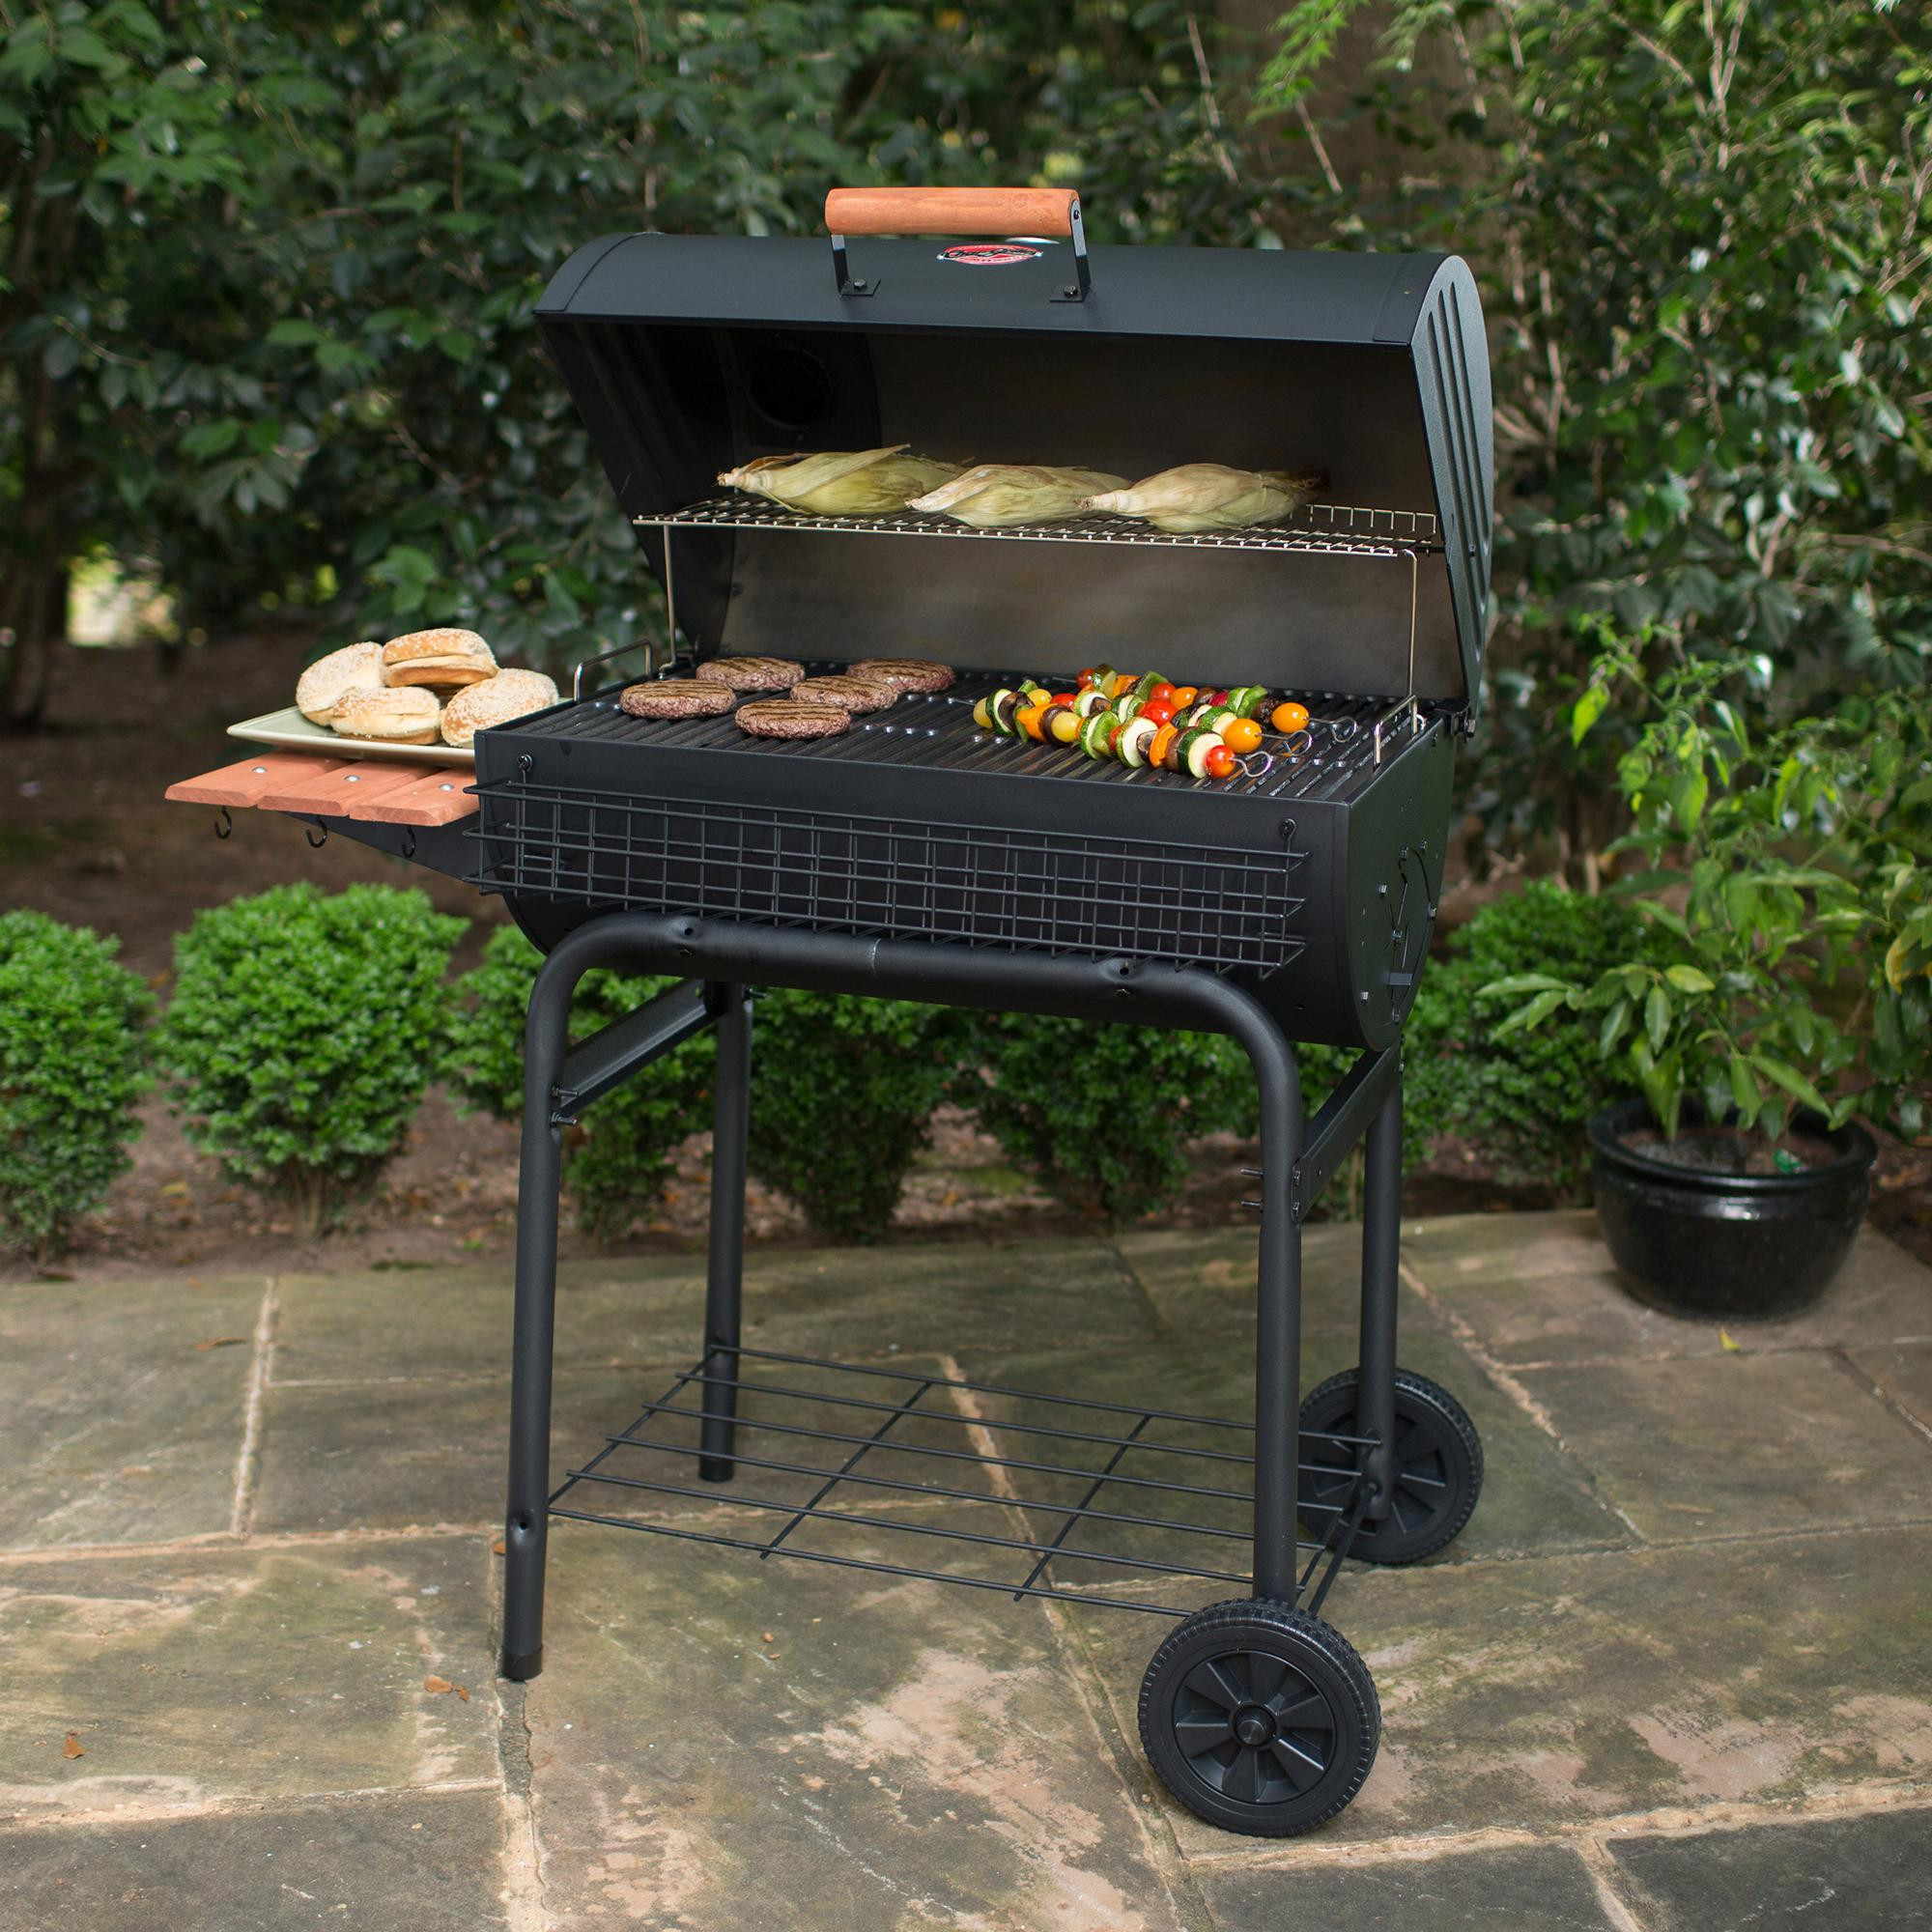 Backyard Barbecue Grill
 Charcoal Grill Smoker Barbecue Weber BBQ Heavy duty Steel